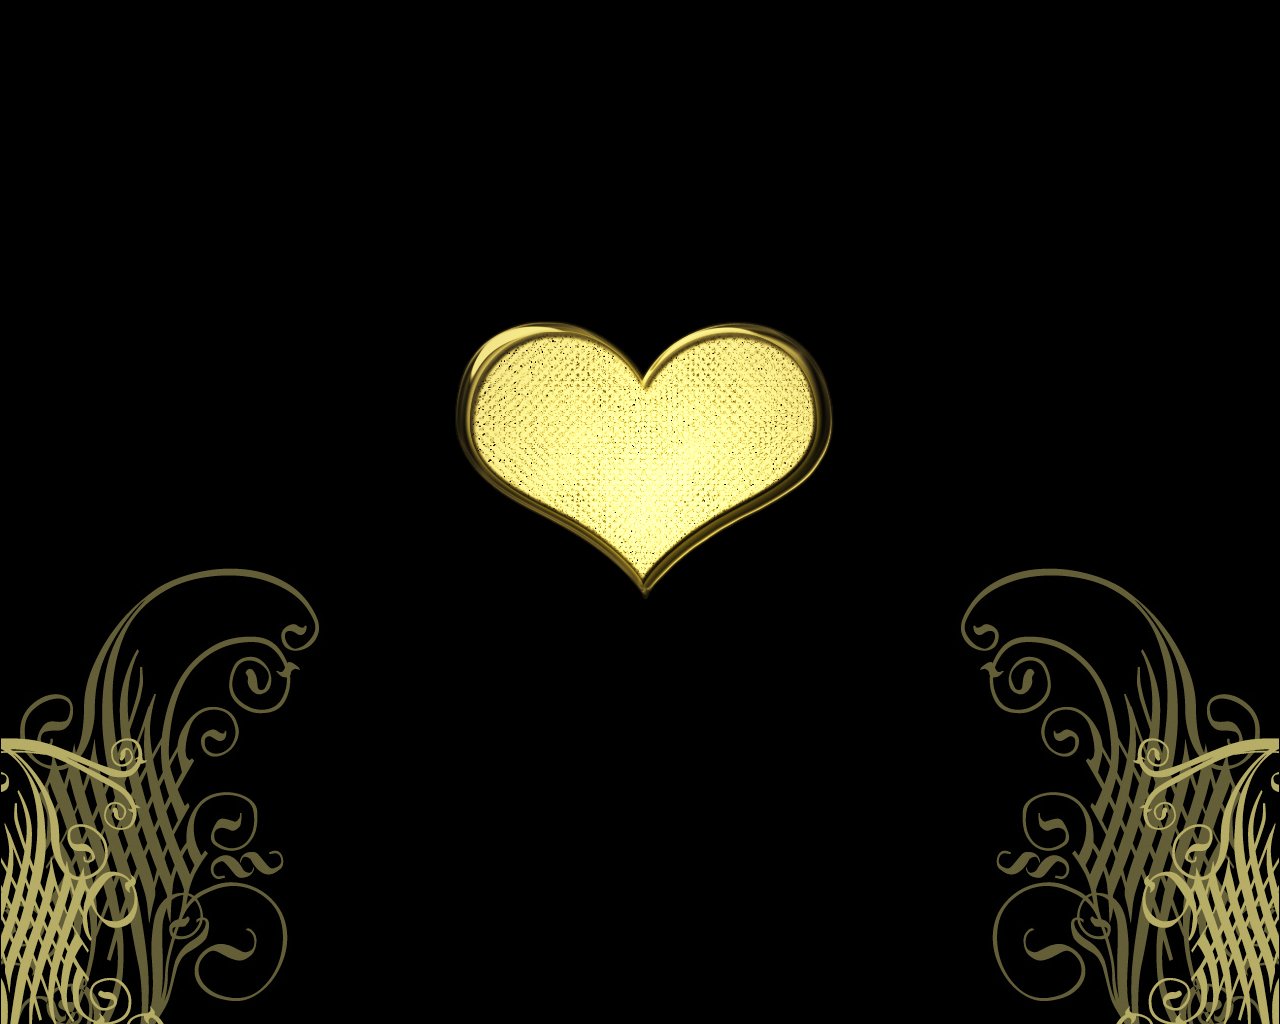 a gold heart in front of an ornate black background